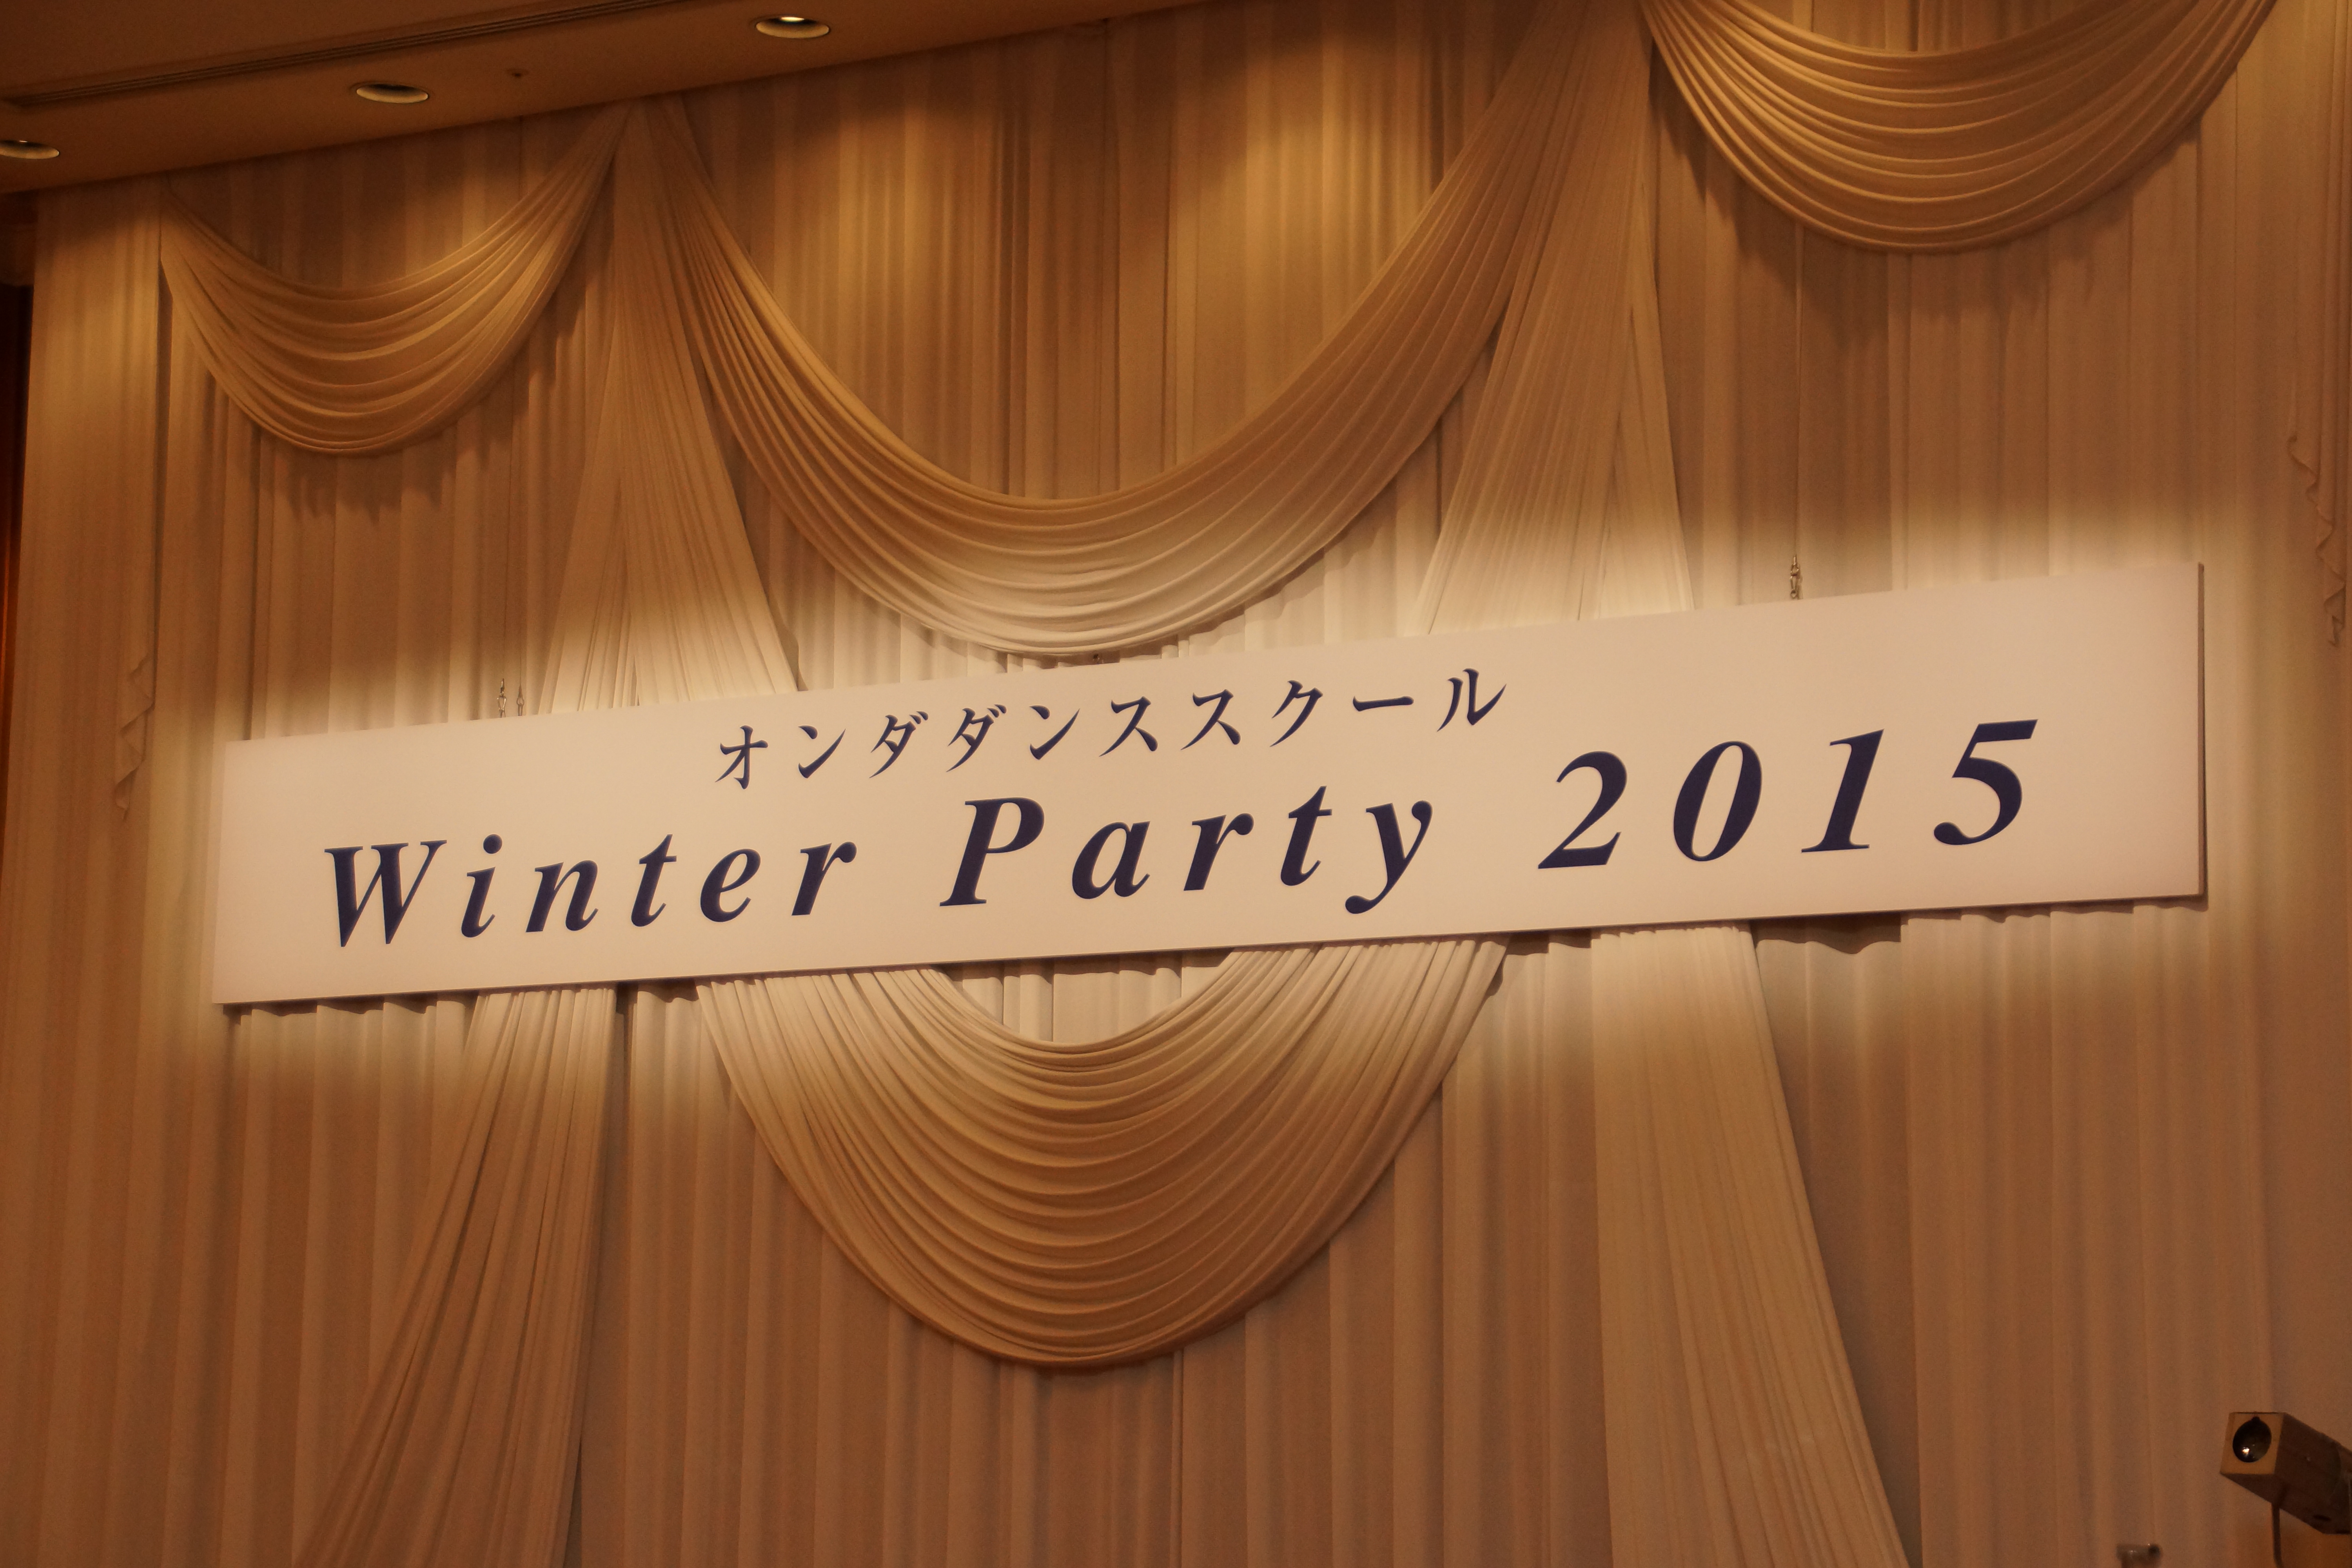 Witer Party 2015